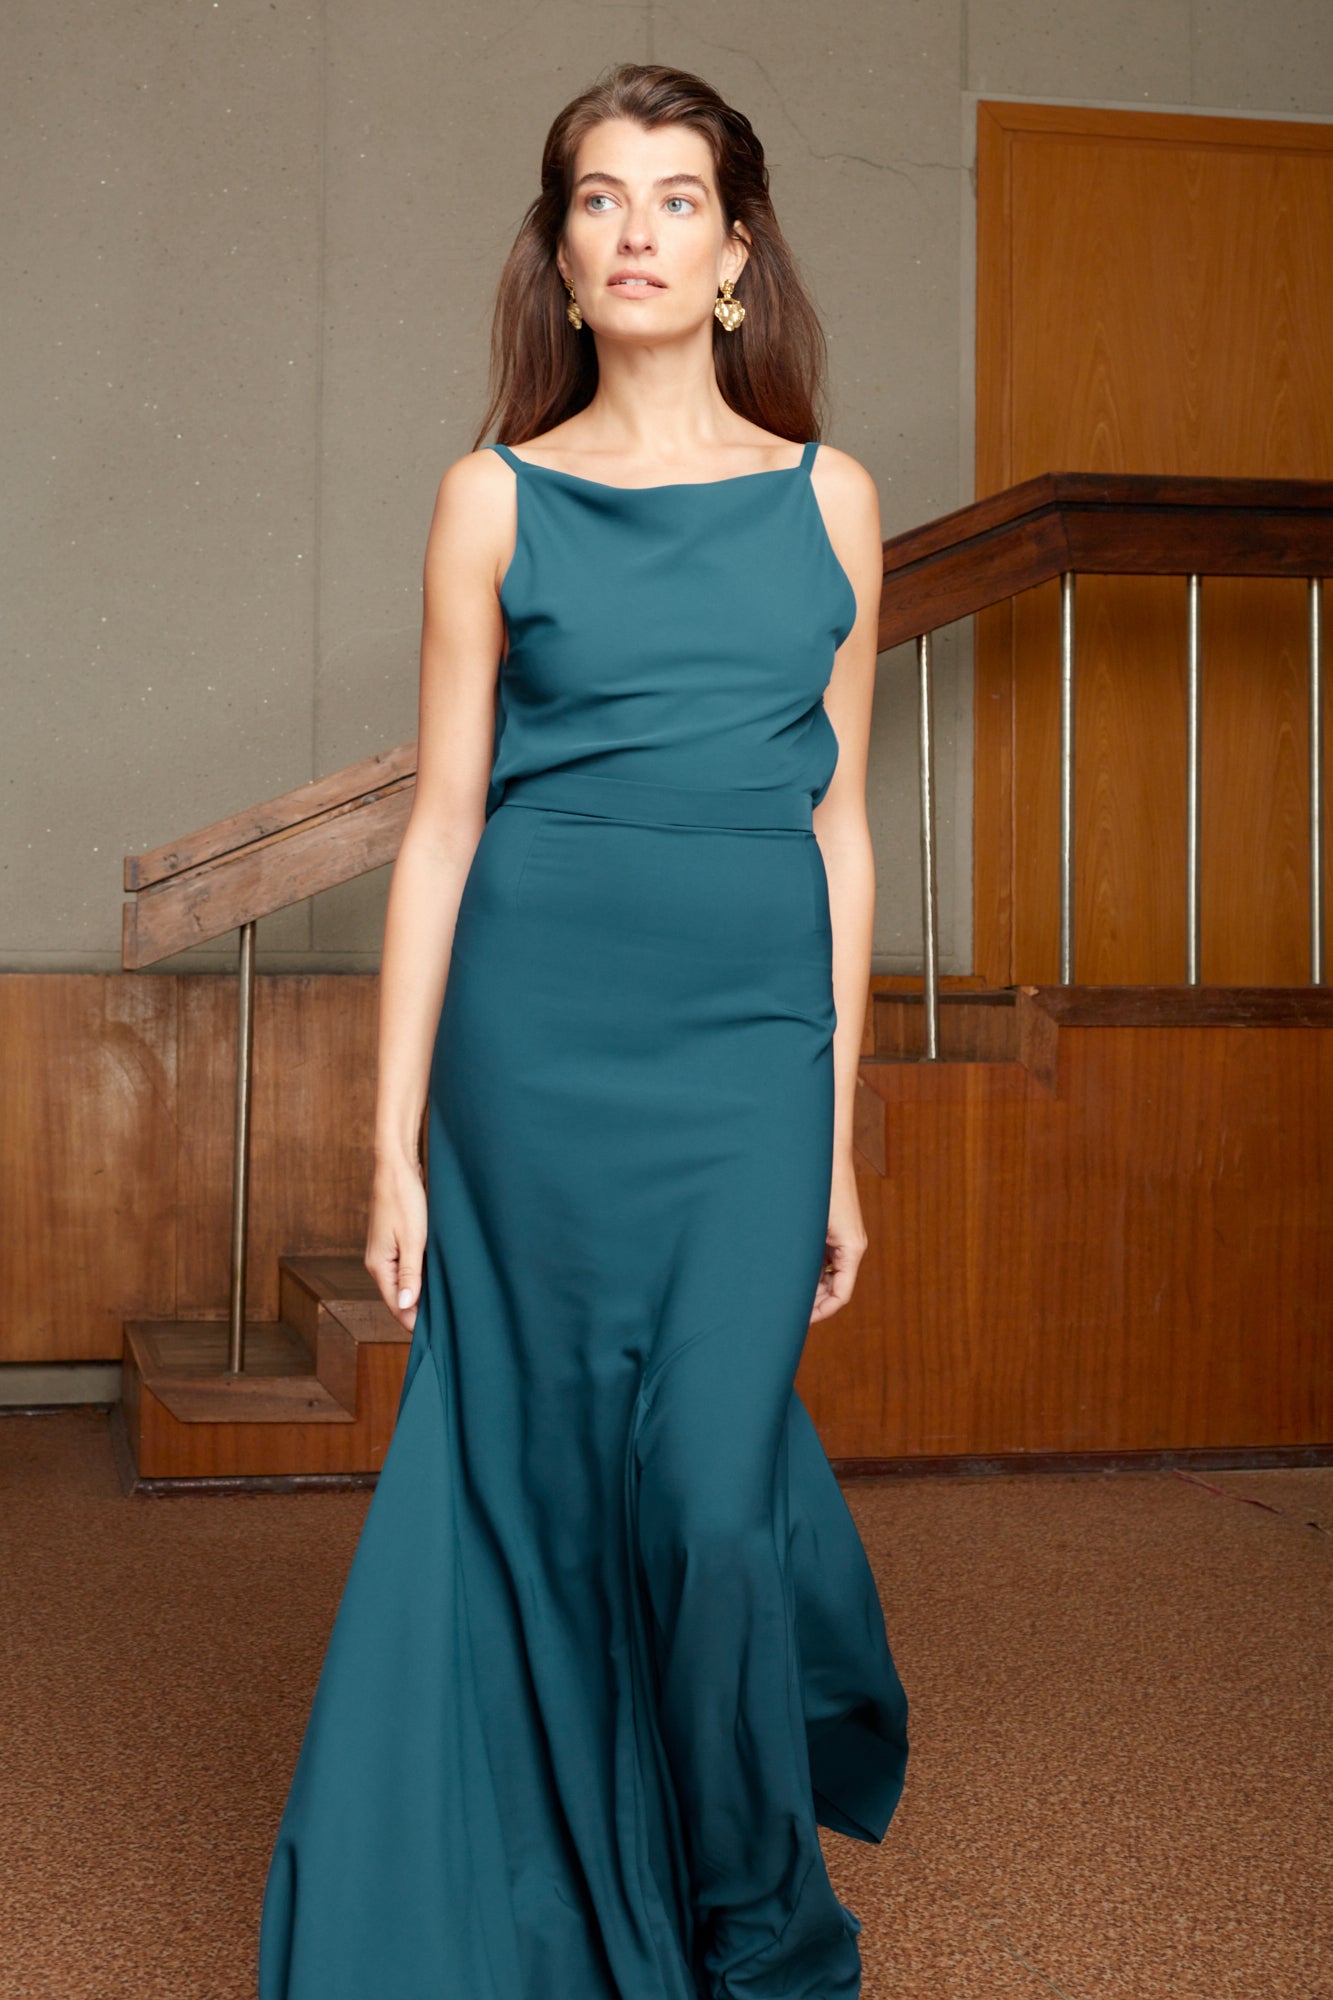 Blue evening gown for gala events